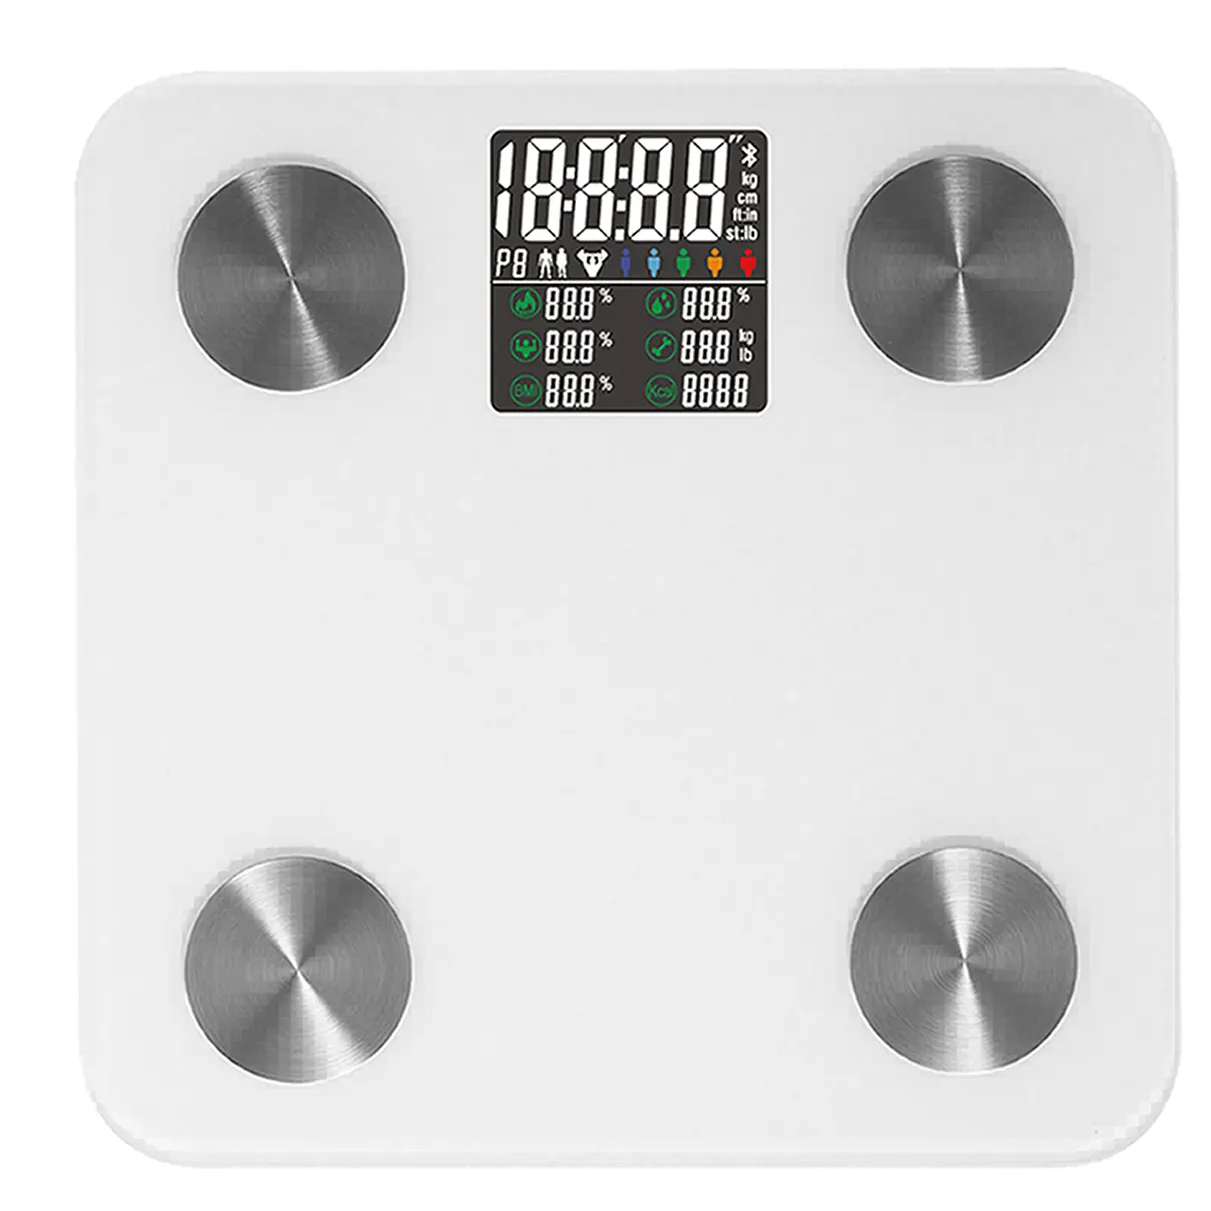 Health 180 kg Bluetooth Composition Analyzer Measures Digital Bathroom Scale Smart Scale For Body Weight Fat